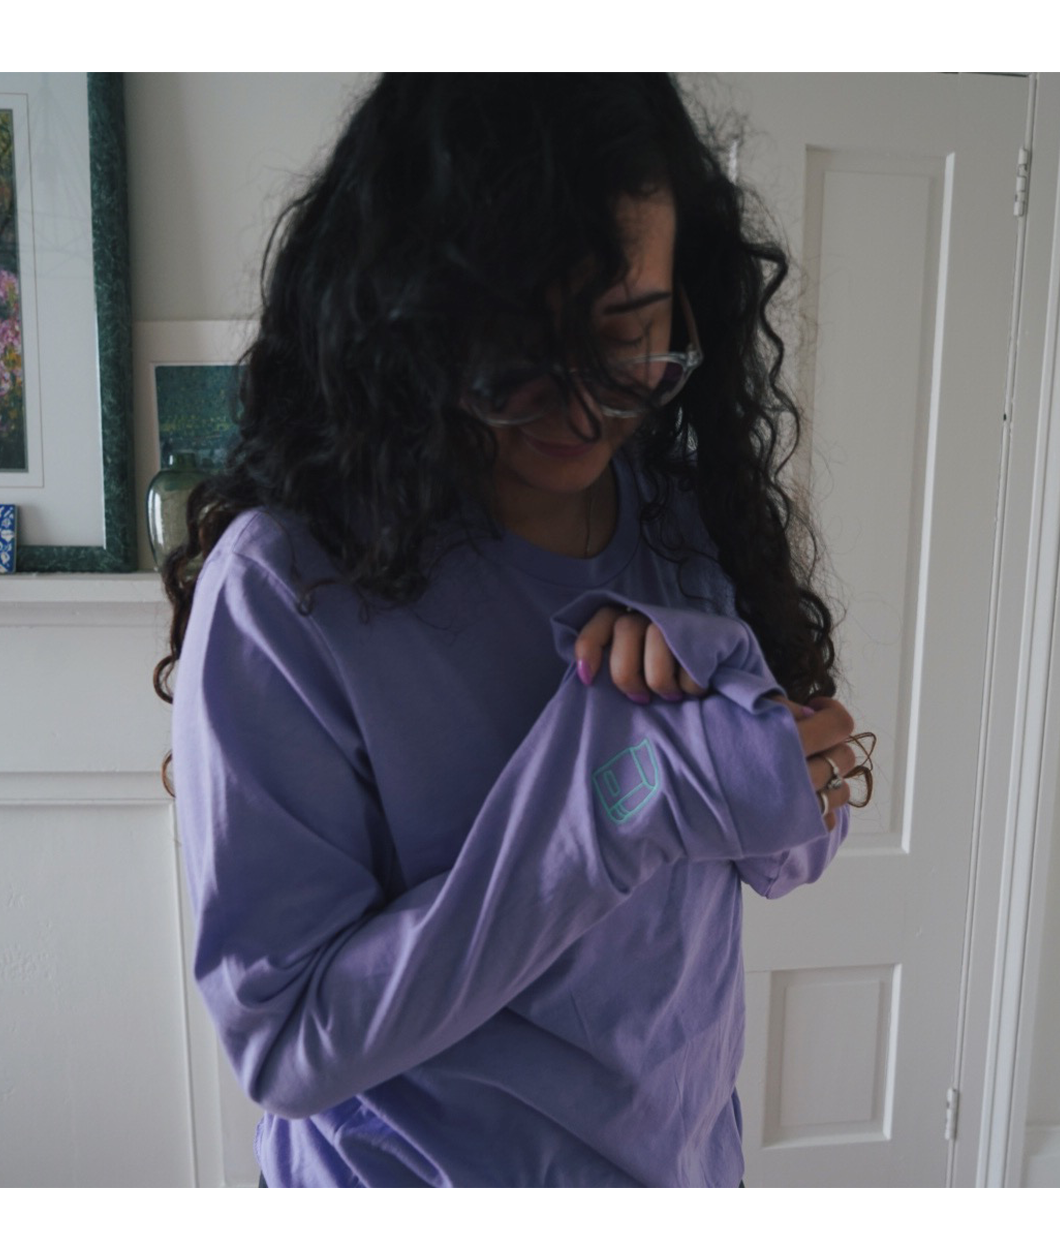 Ariel Bissett holding up the left sleeve of her lavender shirt to show the aqua outline of a book there.